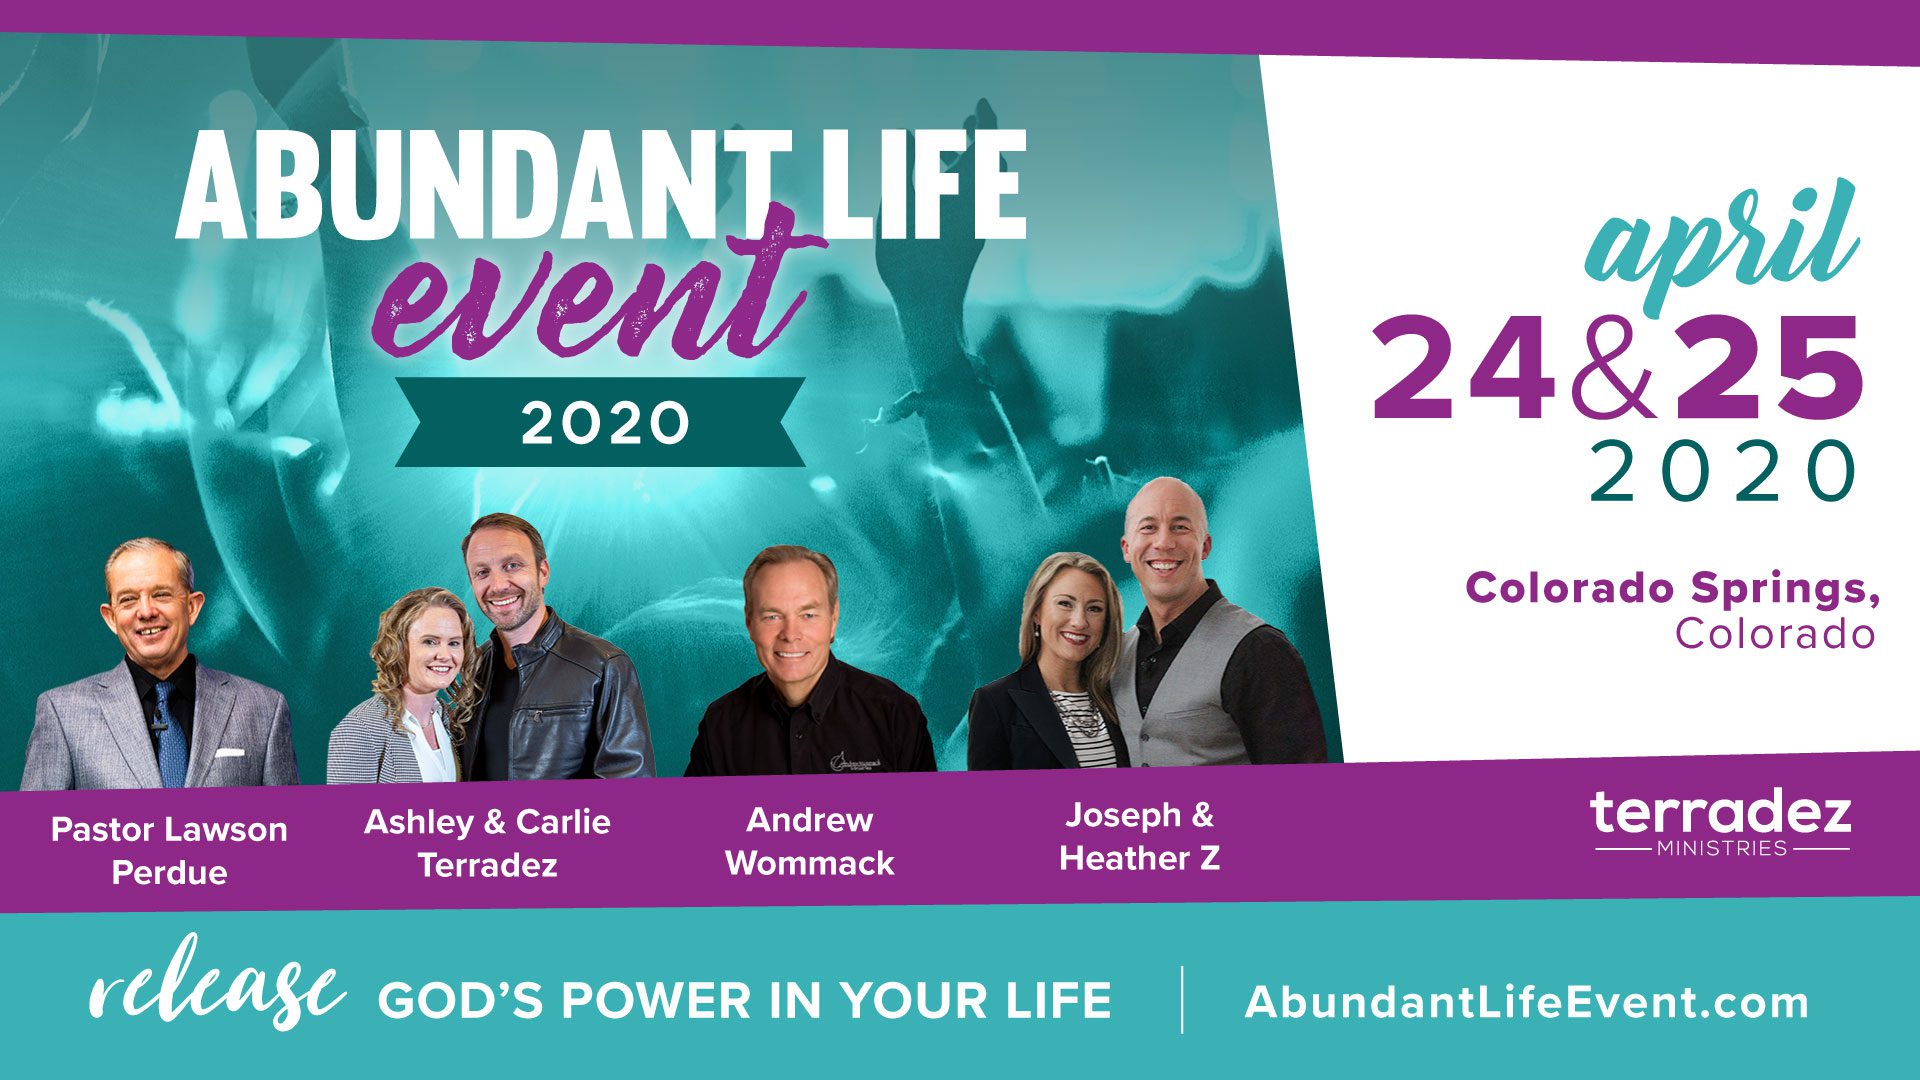 Join Ashley & Carlie Terradez with Andrew Wommack for the Abundant Life Event 2020!